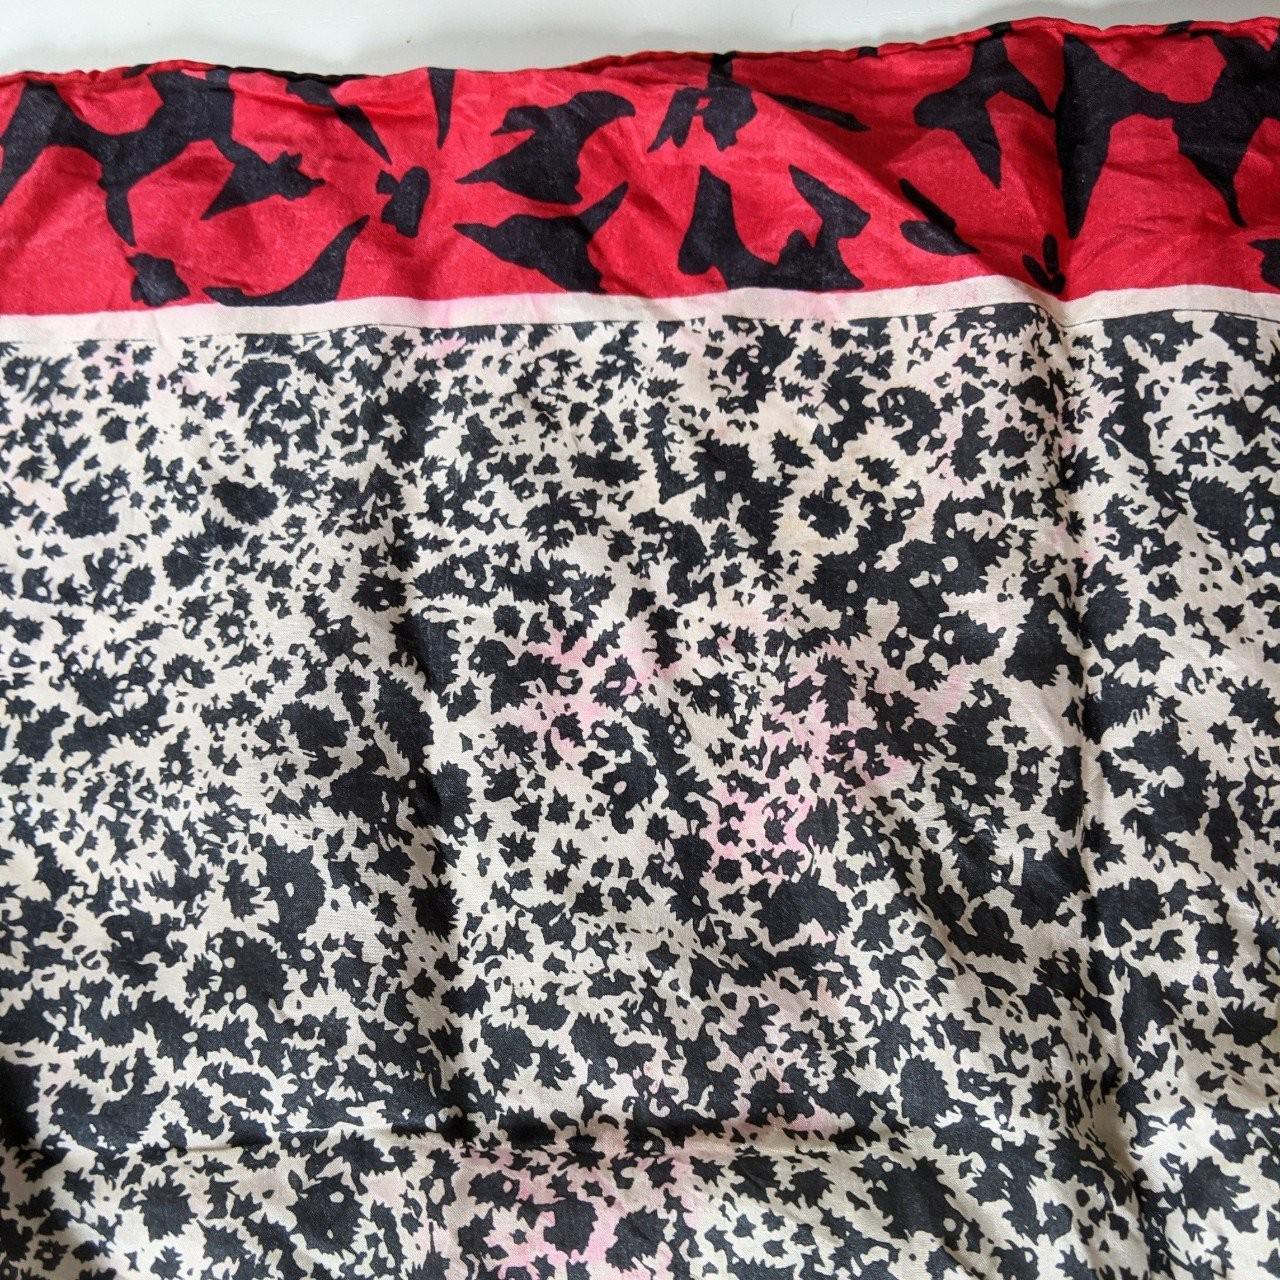 Women's Red and Black Scarf-wraps (4)